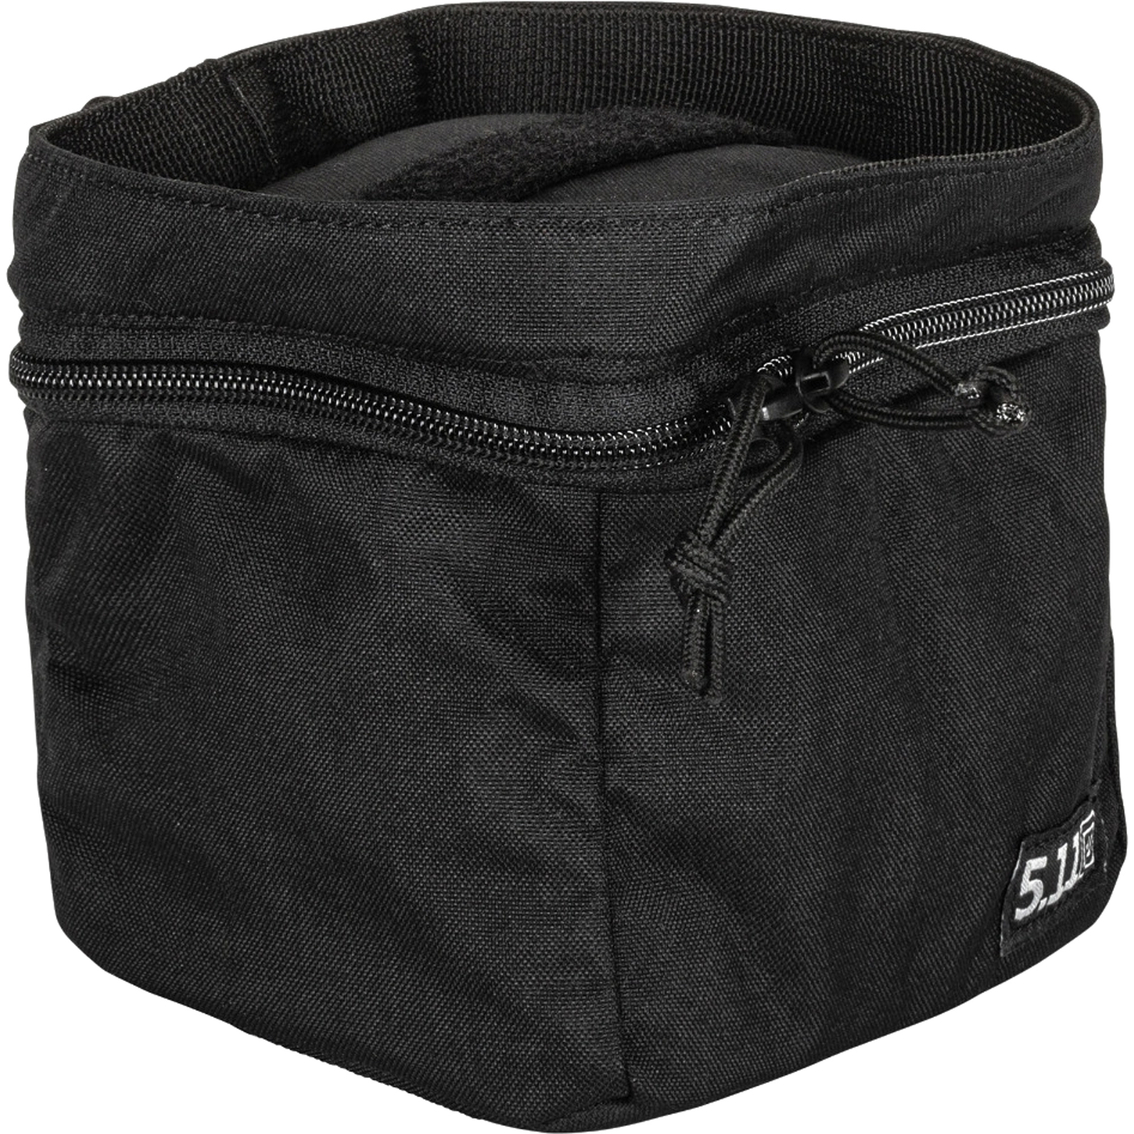 5.11 Range Master Pouch 7.5 x 6 in. - Image 2 of 2